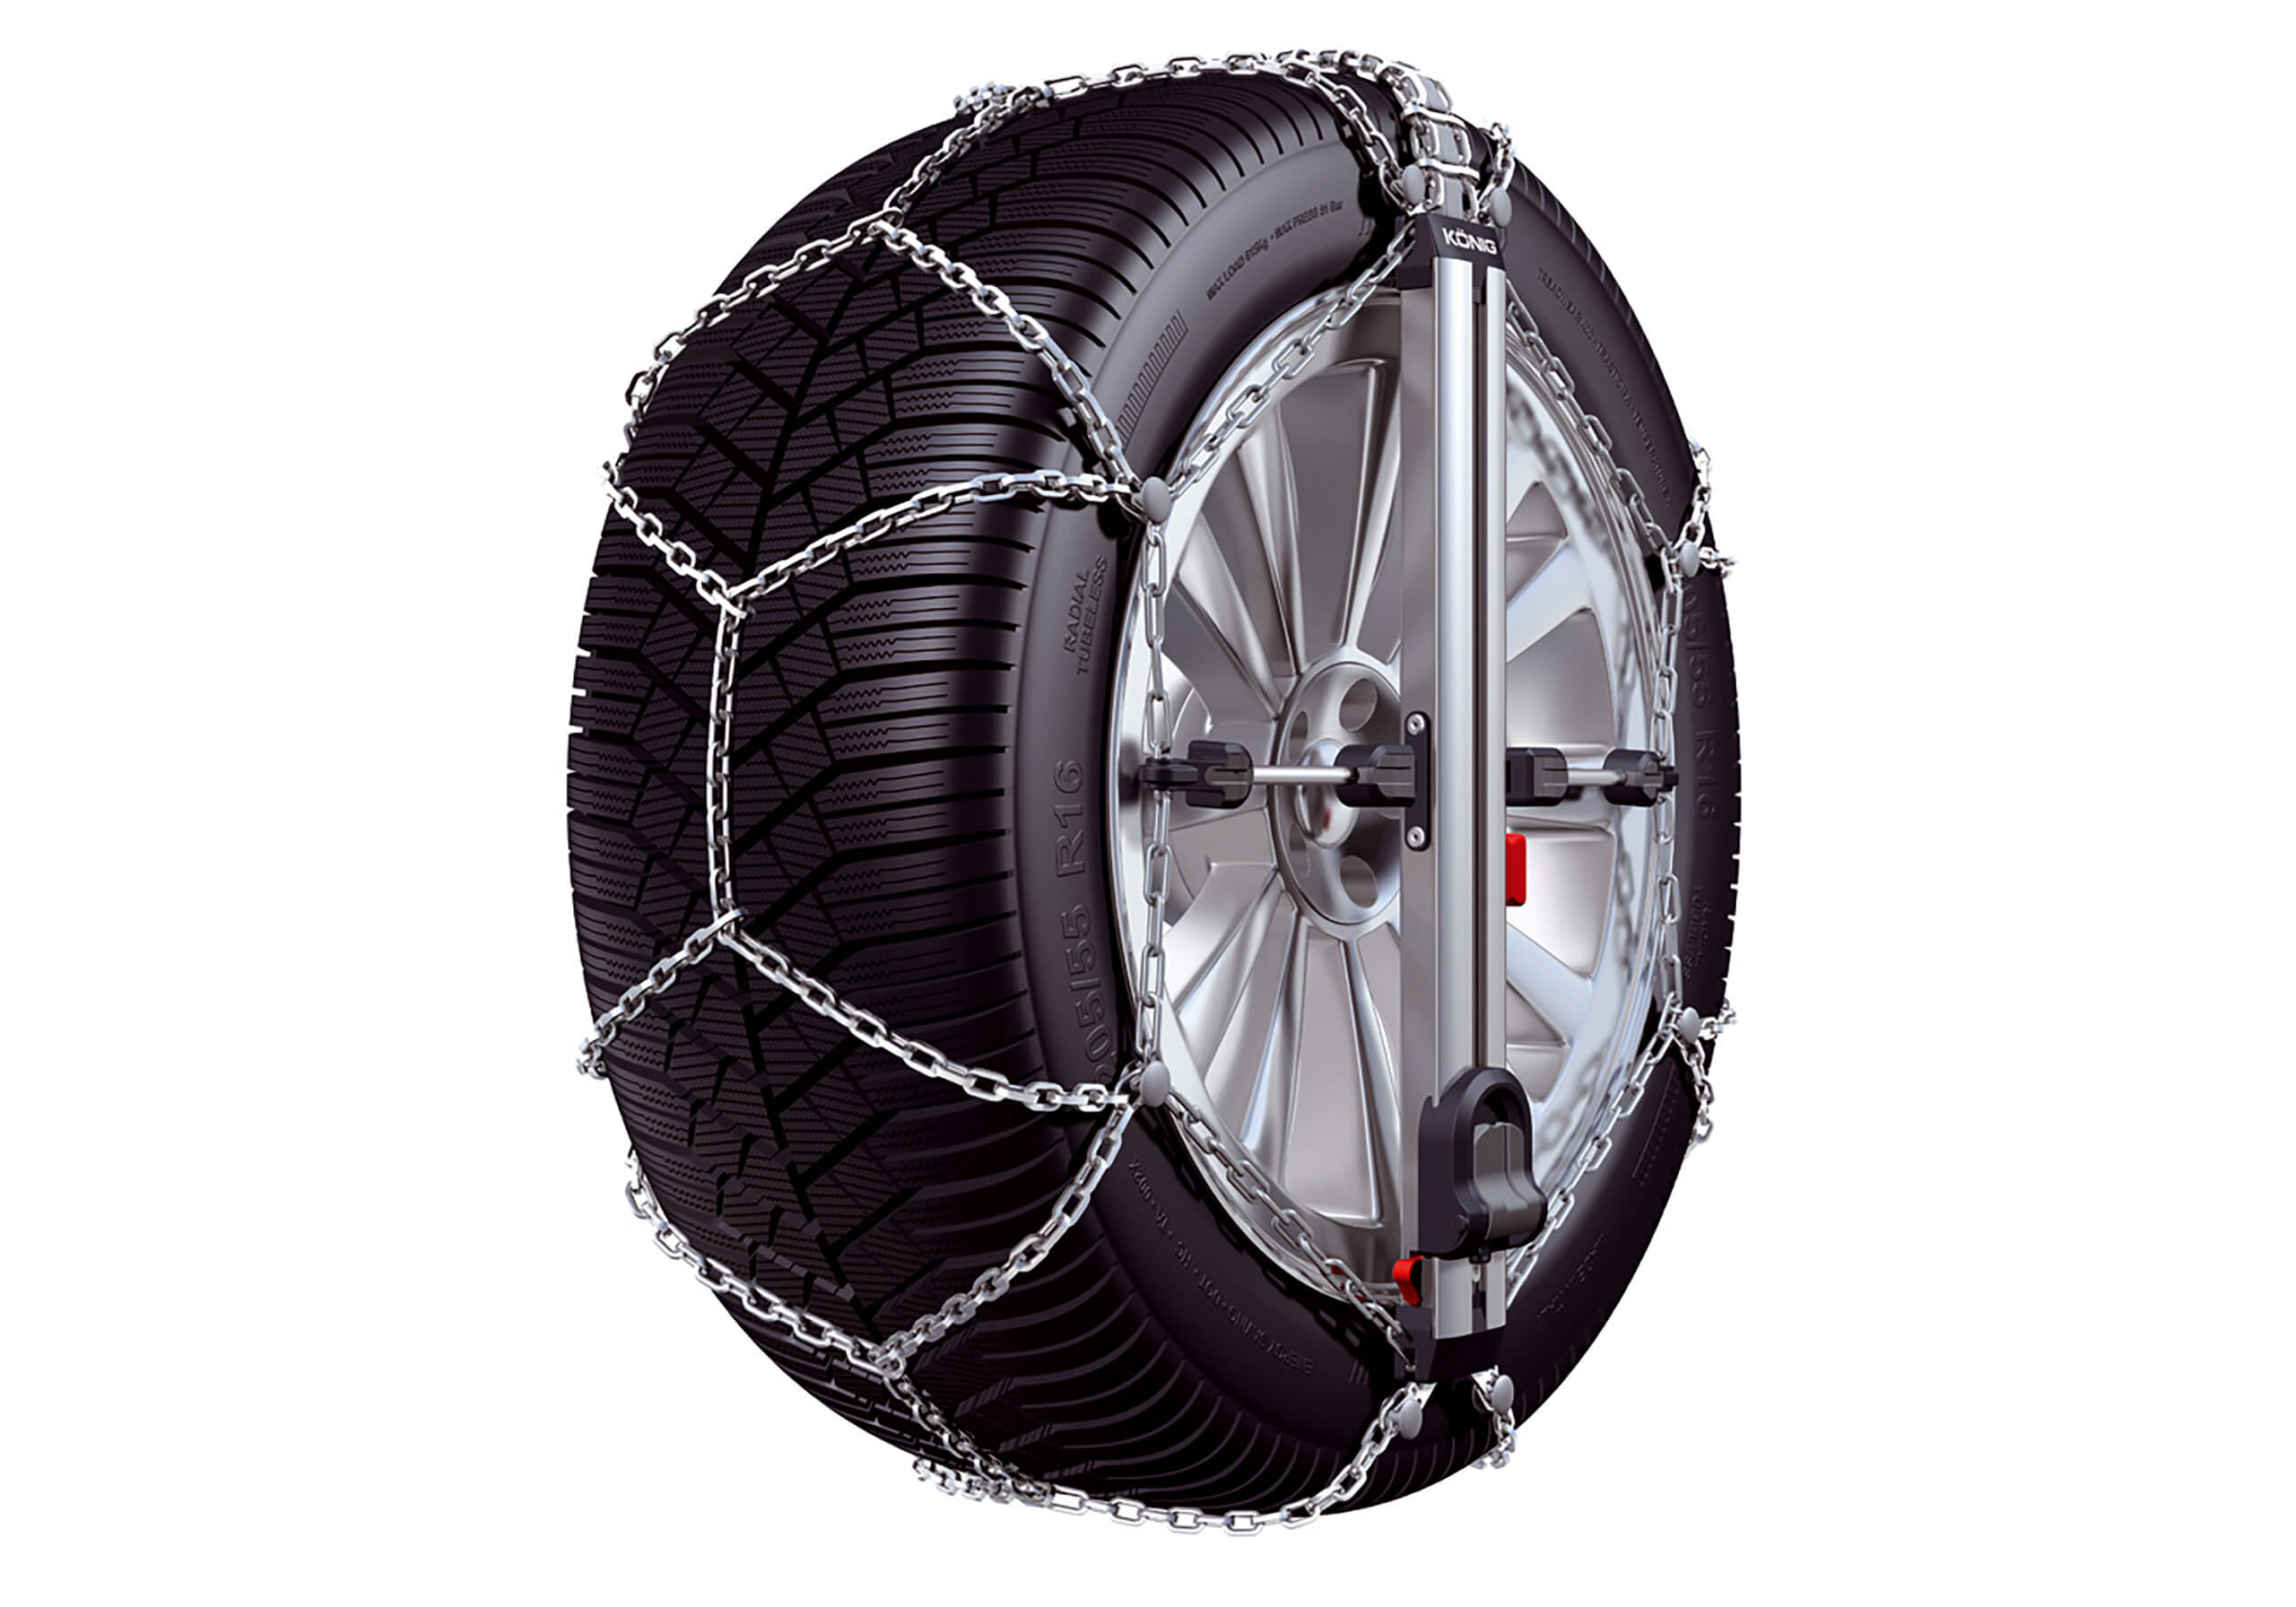 BMW 3 series coupe (1999 to 2002):Knig CU-9 Easy-fit snow chains (pair) no. KGCU-9 090